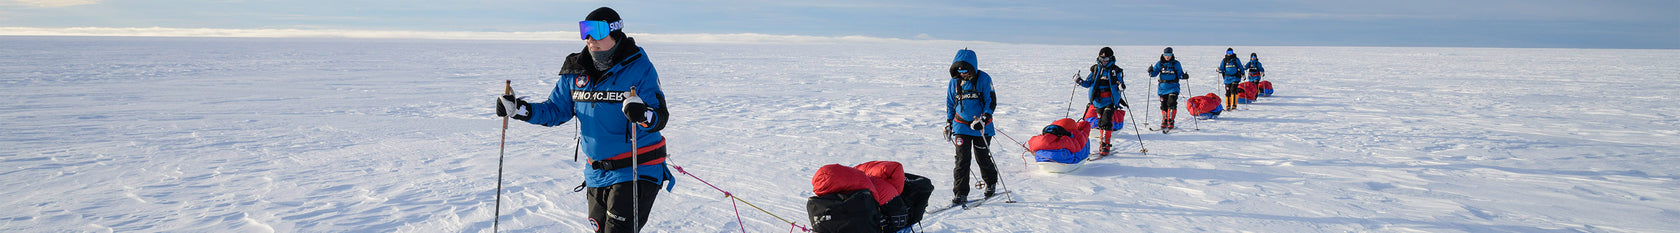 A group expedition snowshoeing on ice and snow while pulling their equipment.